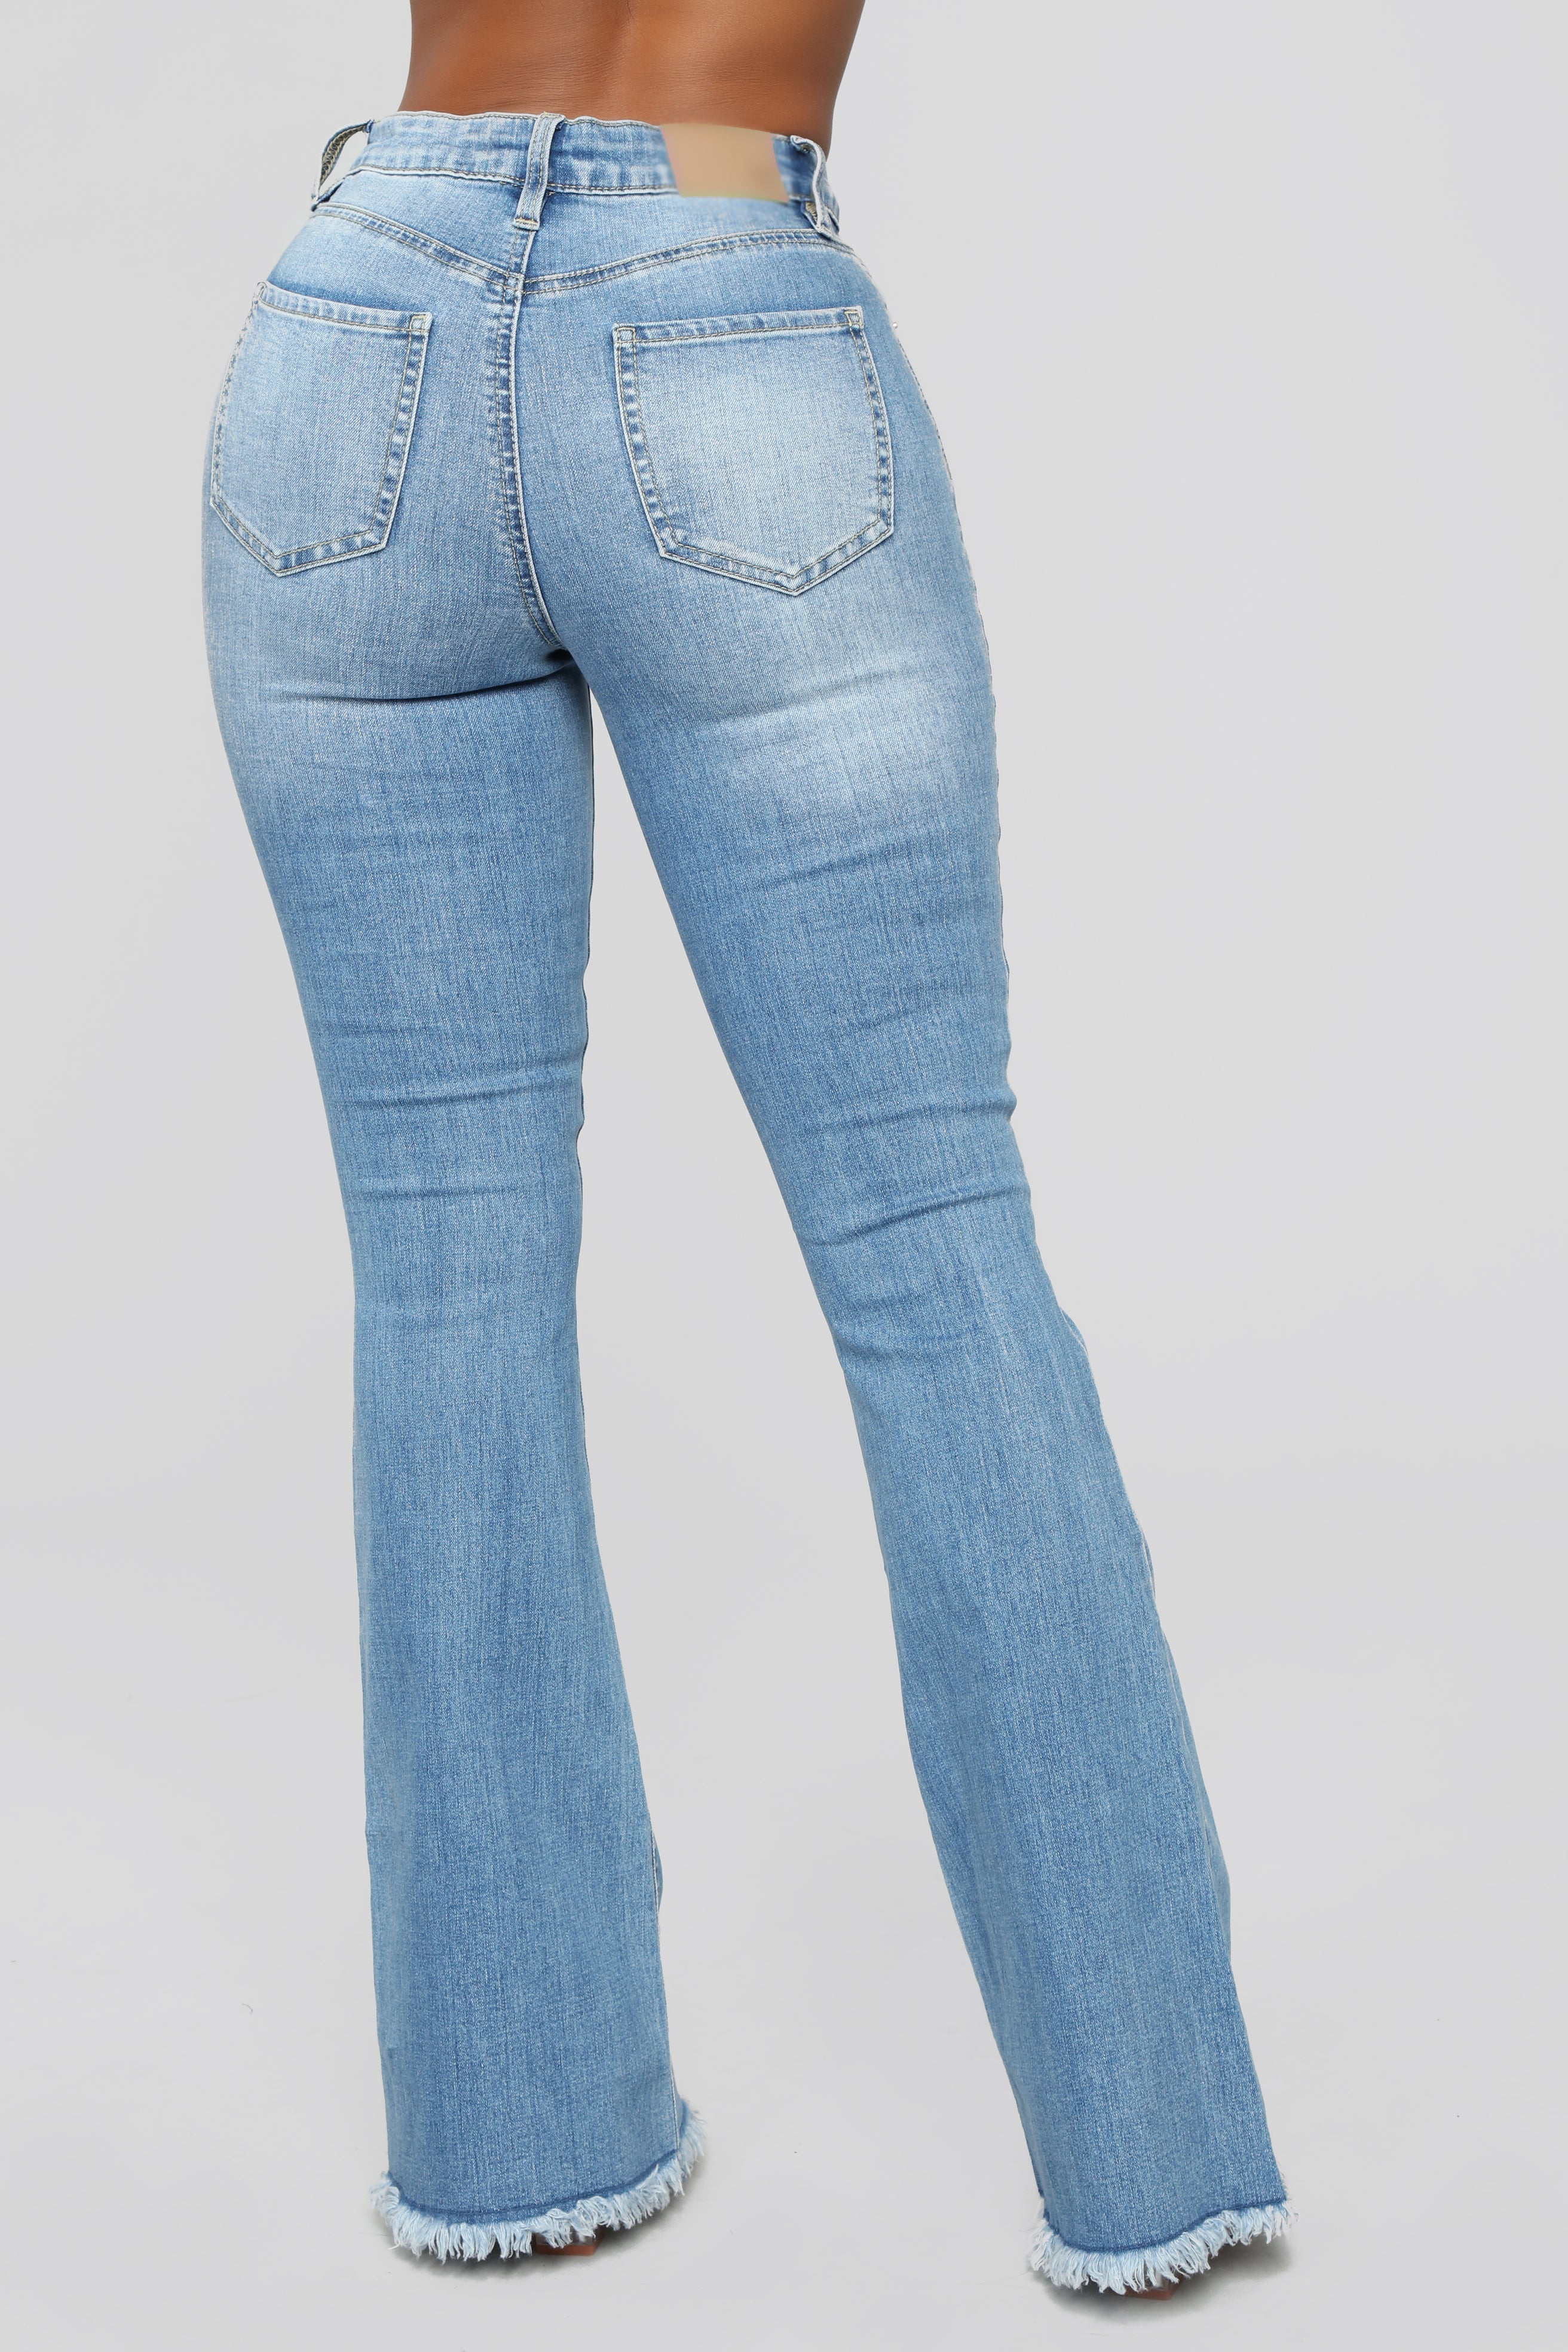 Nothing But The Best Flare Jeans - Medium Blue Wash – InsStreet